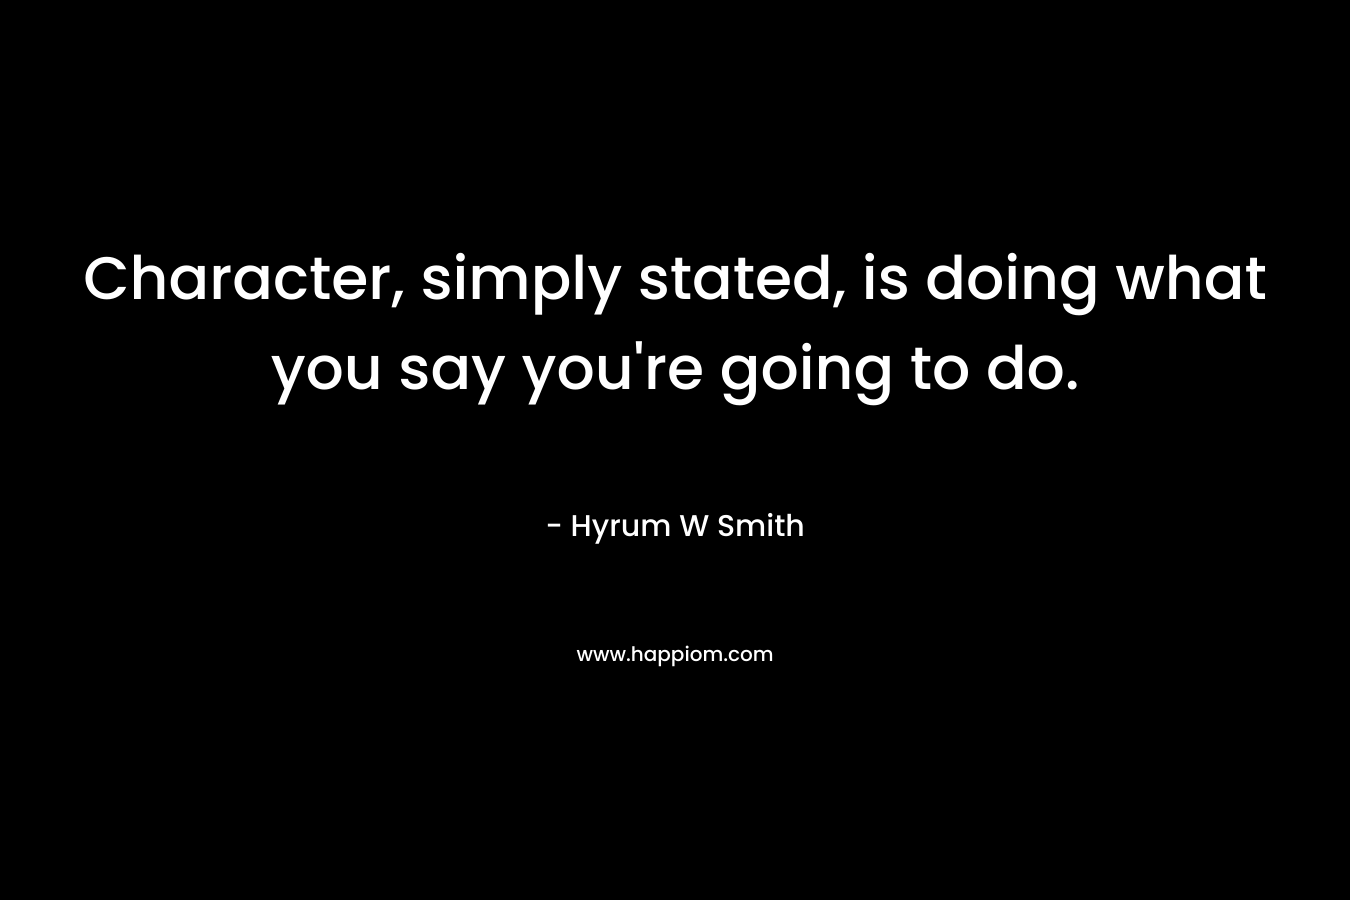 Character, simply stated, is doing what you say you're going to do.